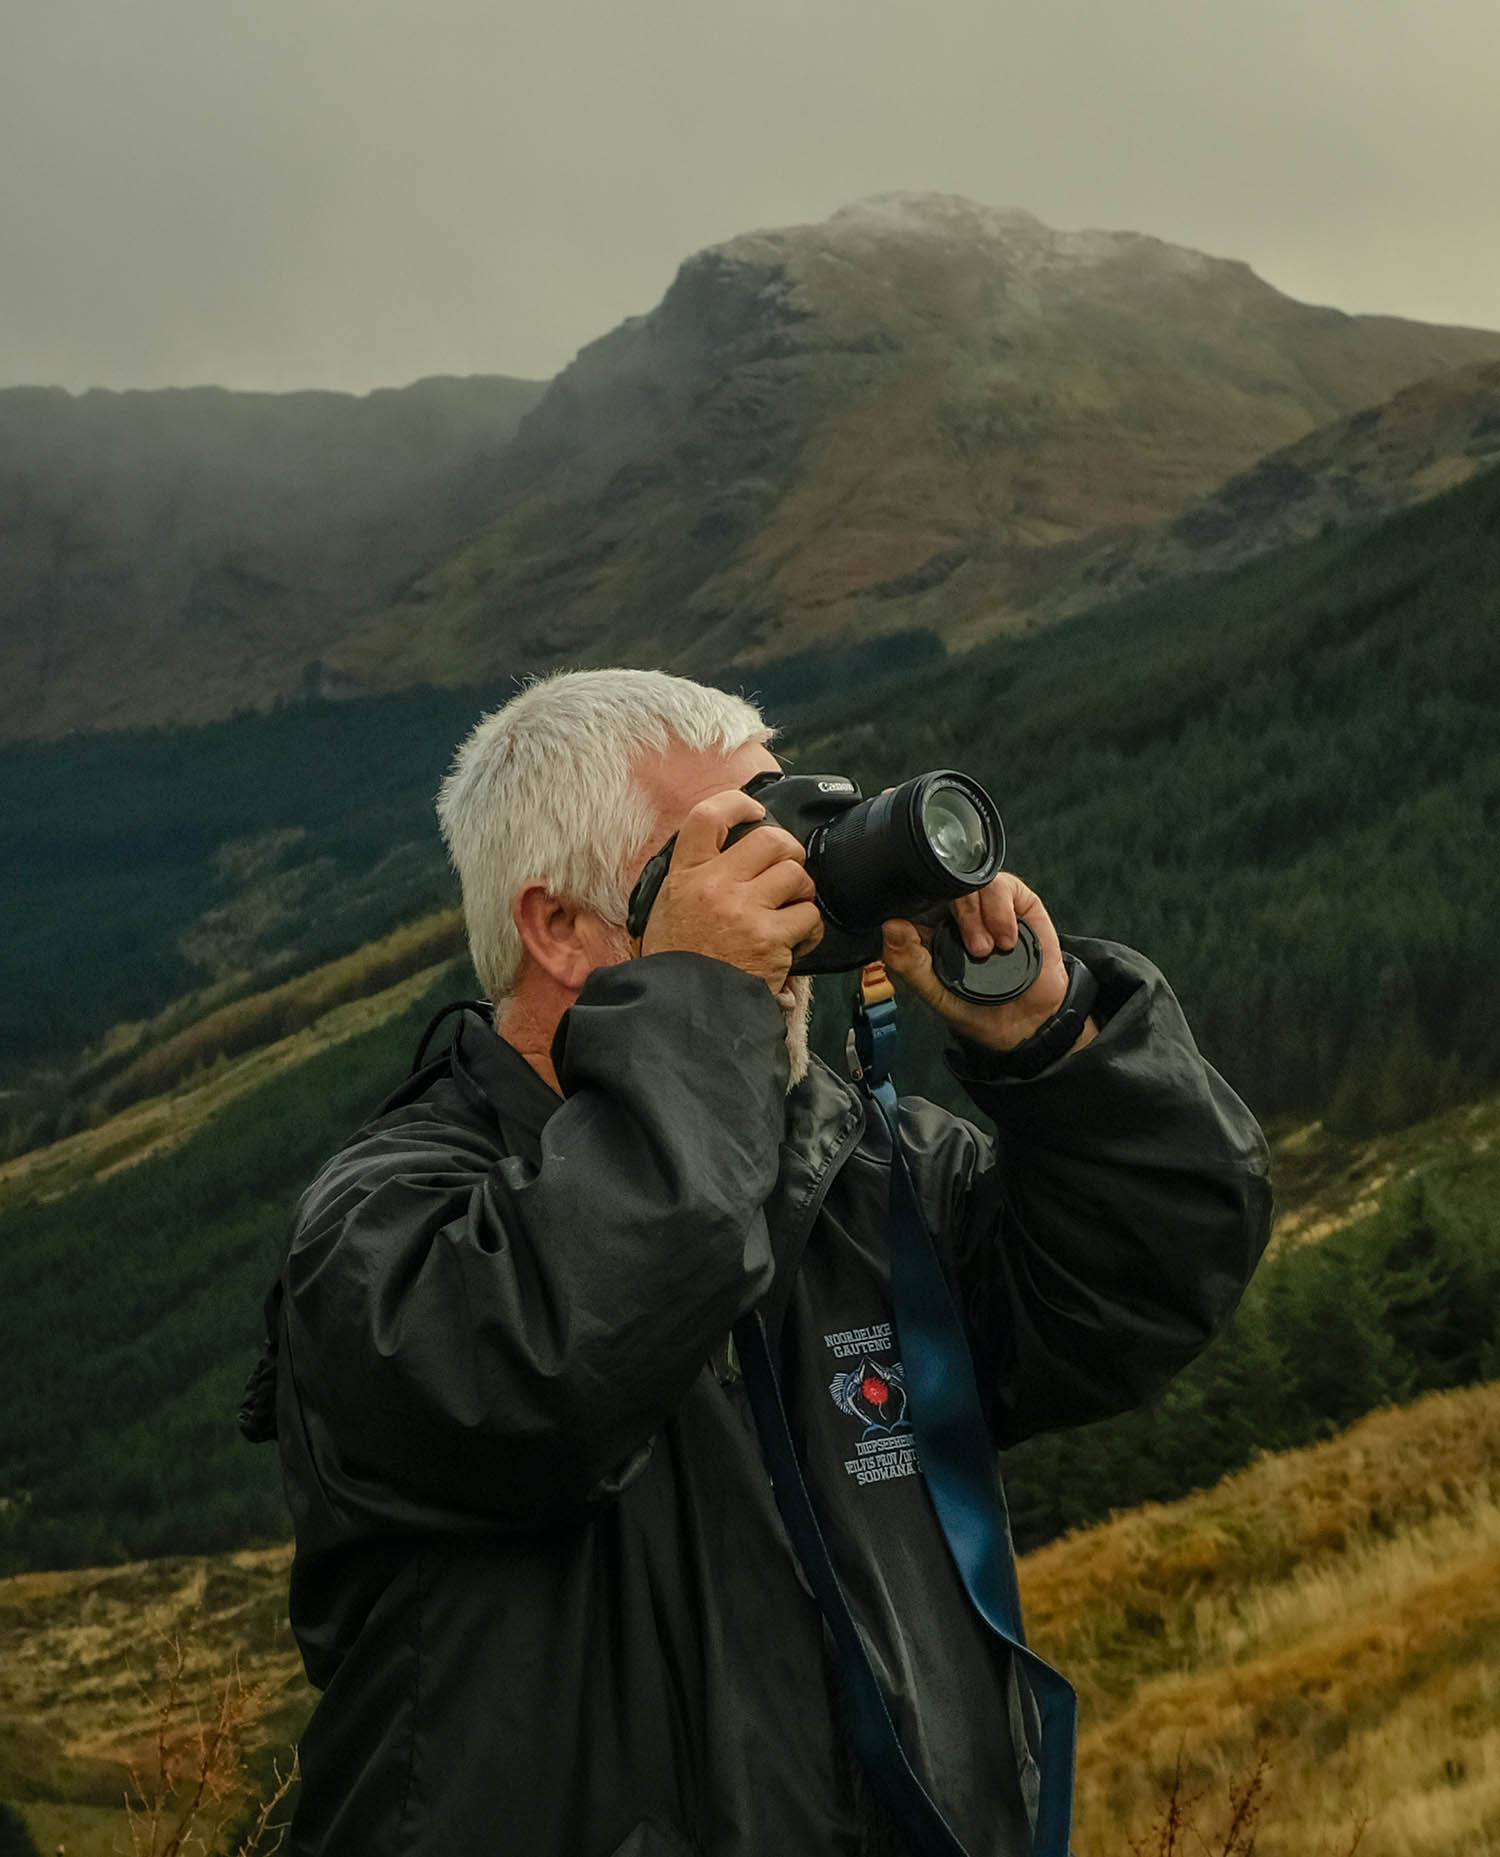 Photograph of a man taking photographs in the mountains